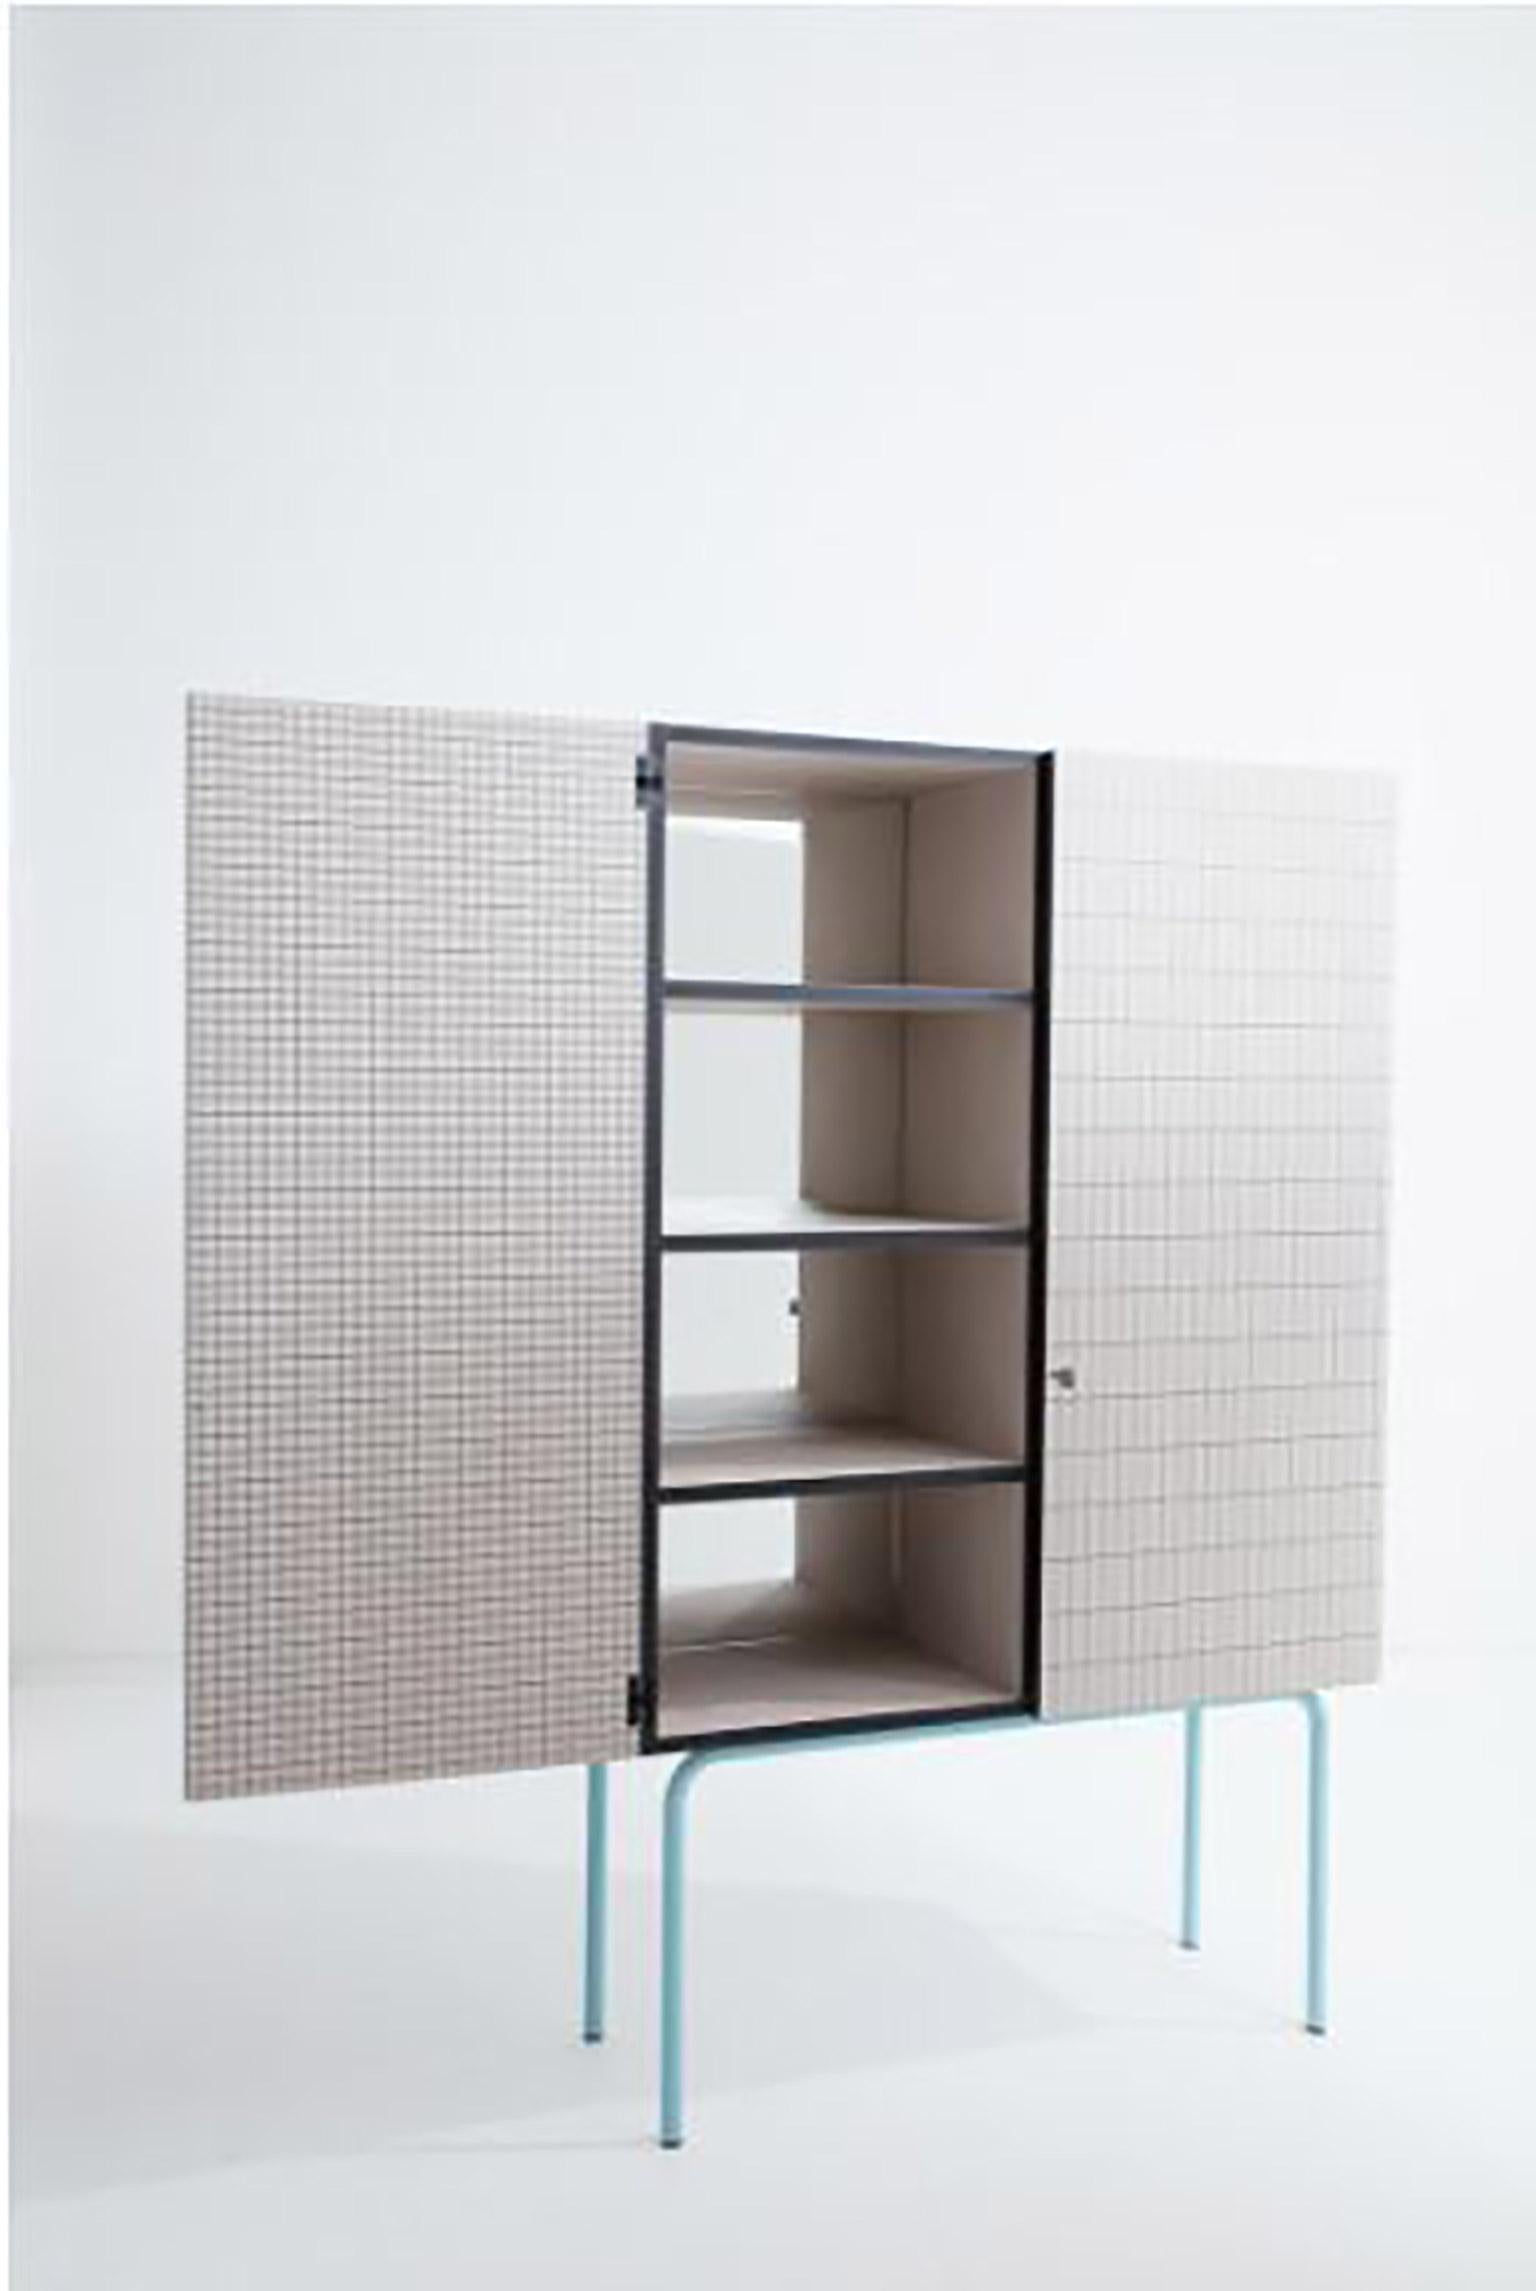 Painted Contemporary Cabinet, Check Surface Texture Printed, Bauhaus-Inspired Structure For Sale